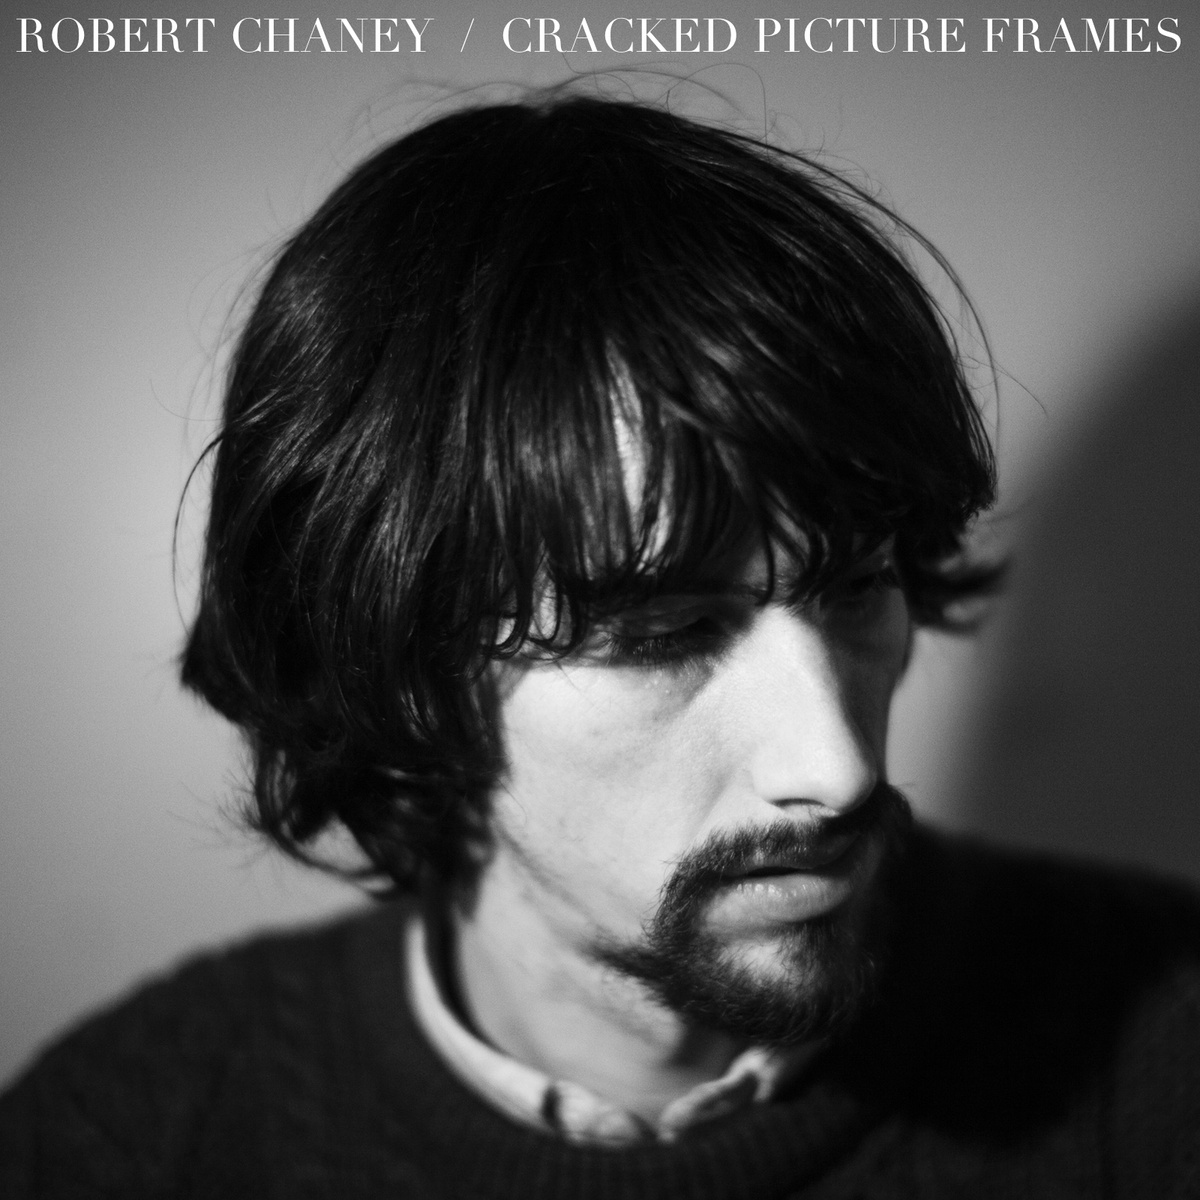 Cracked Picture Frames - Robert Chaney